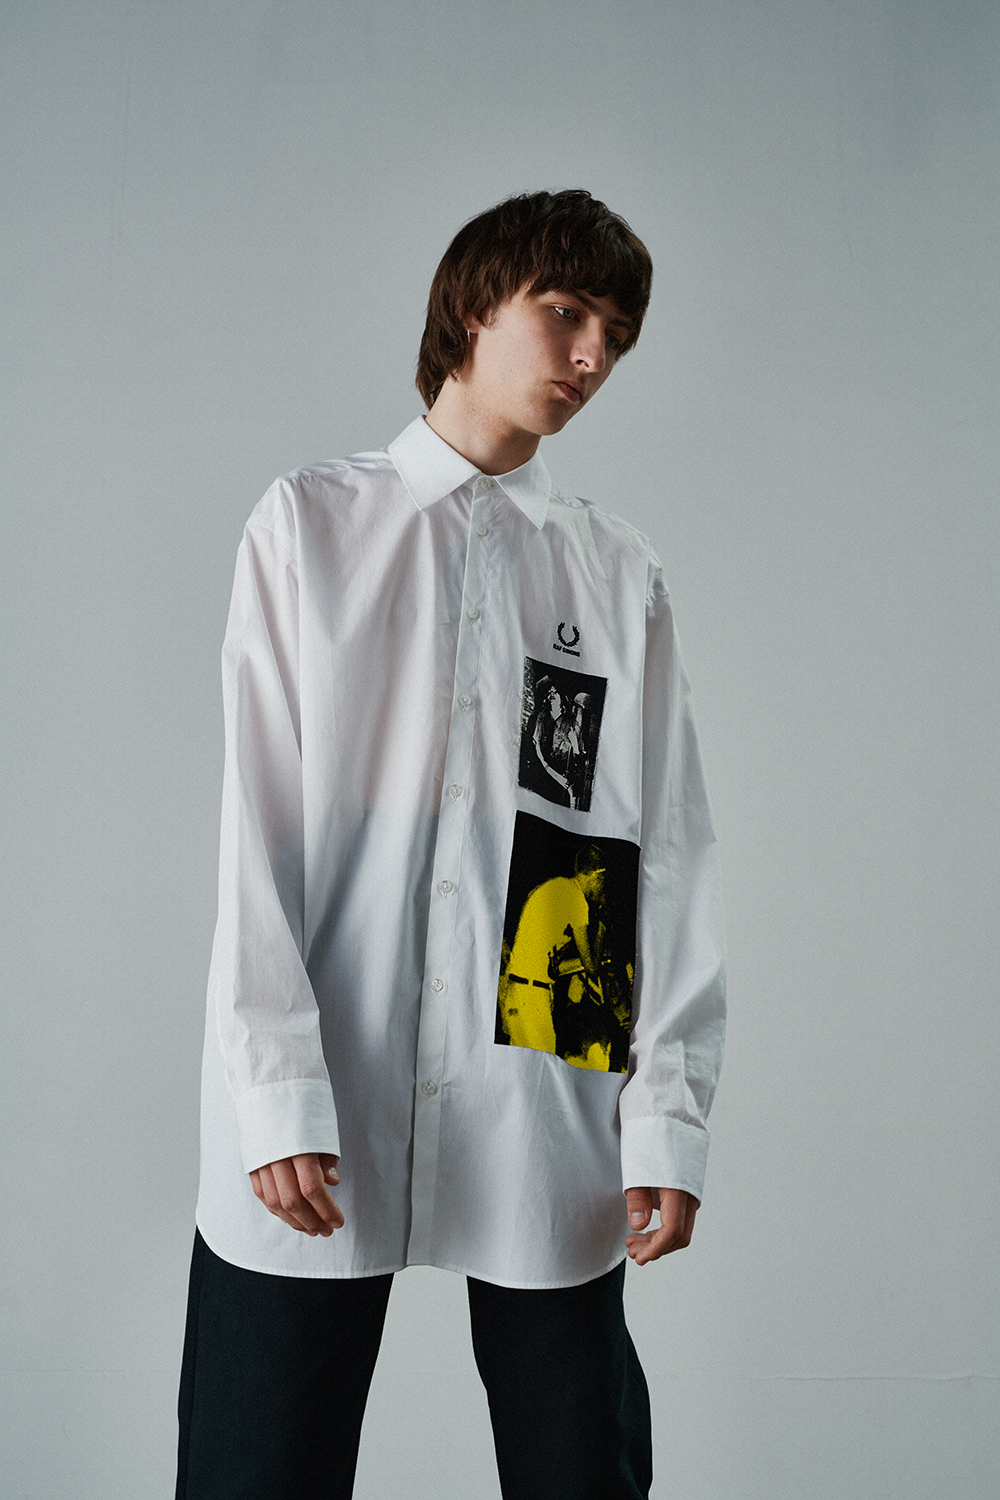 FRED PERRY COLLABORATES WITH RAF SIMONS | CRASH Magazine